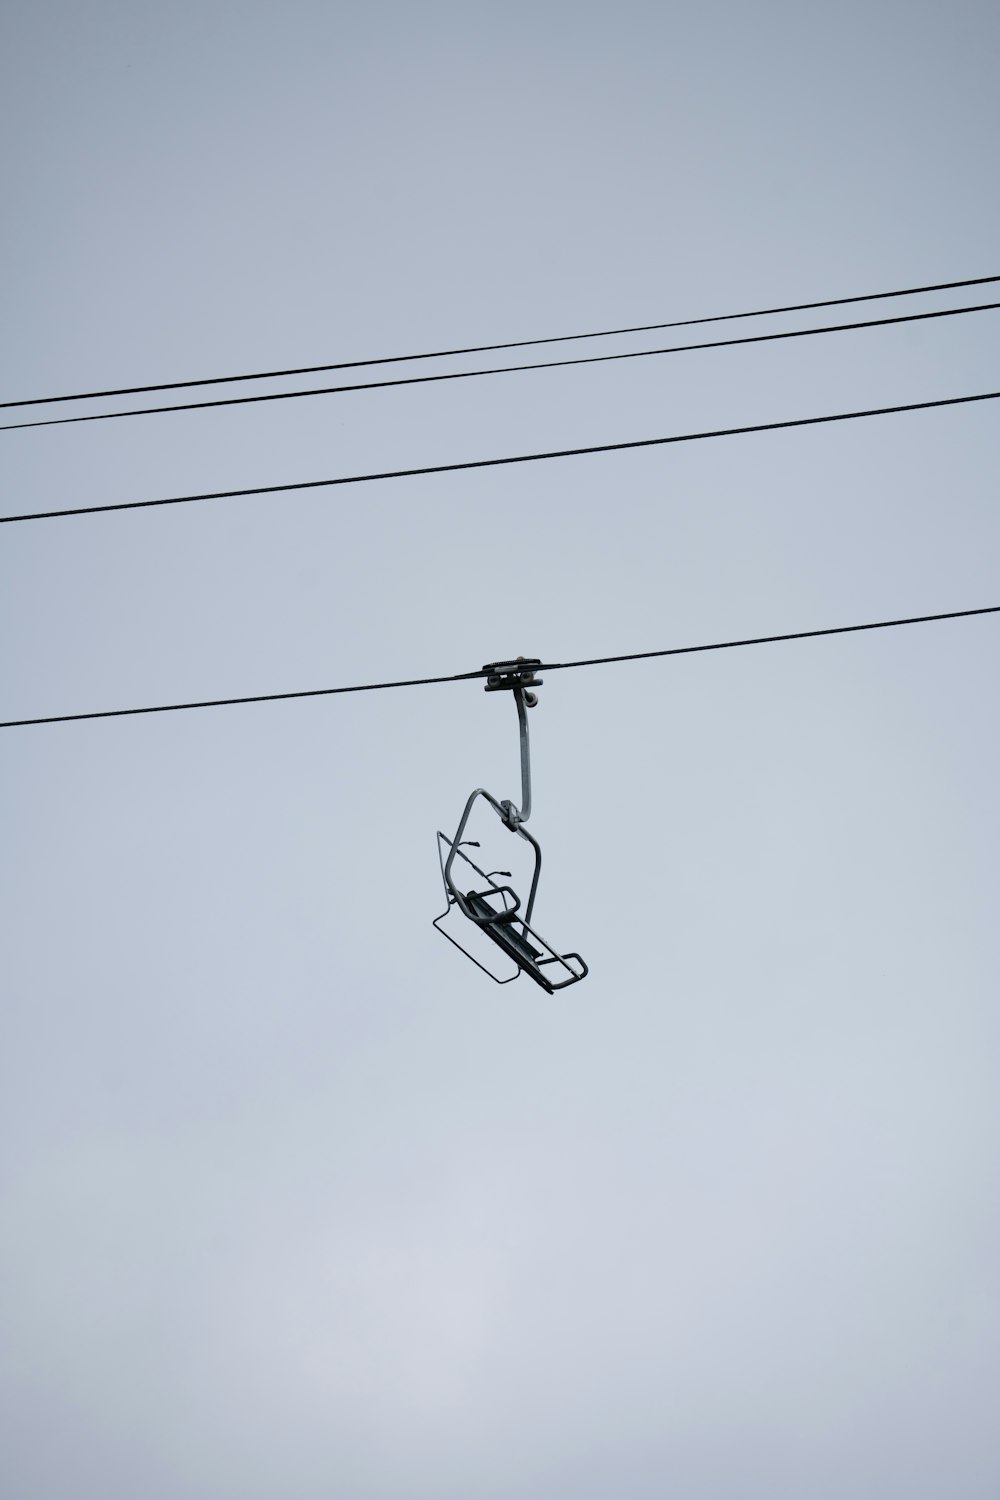 a ski lift suspended from a wire in the sky